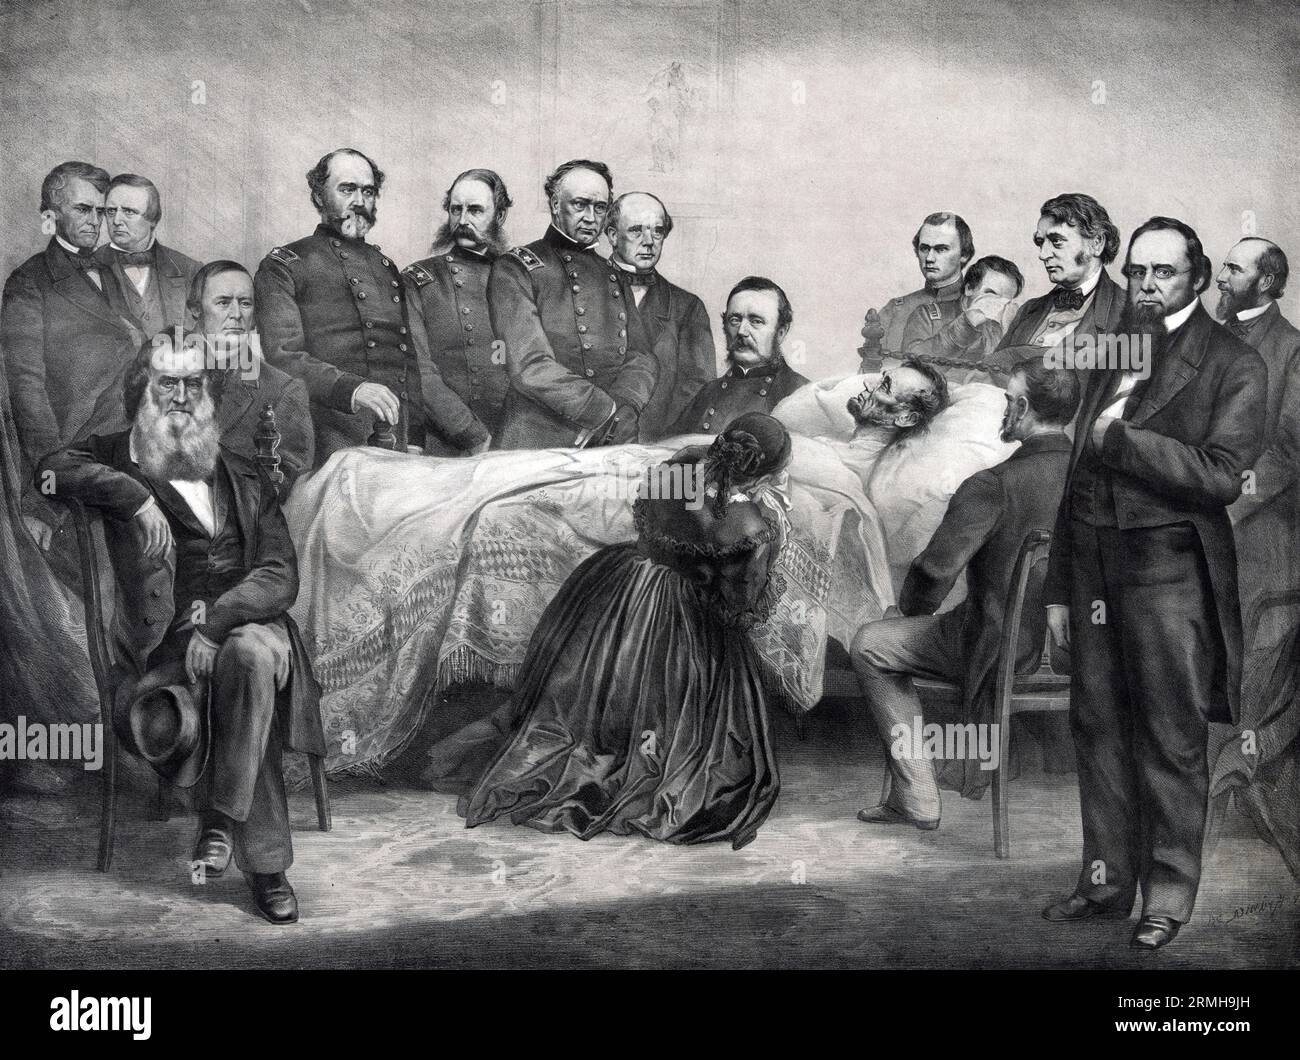 Death bed of Lincoln, Abraham Lincoln lying on a bed surrounded by cabinet members, generals, and family members, Stock Photo